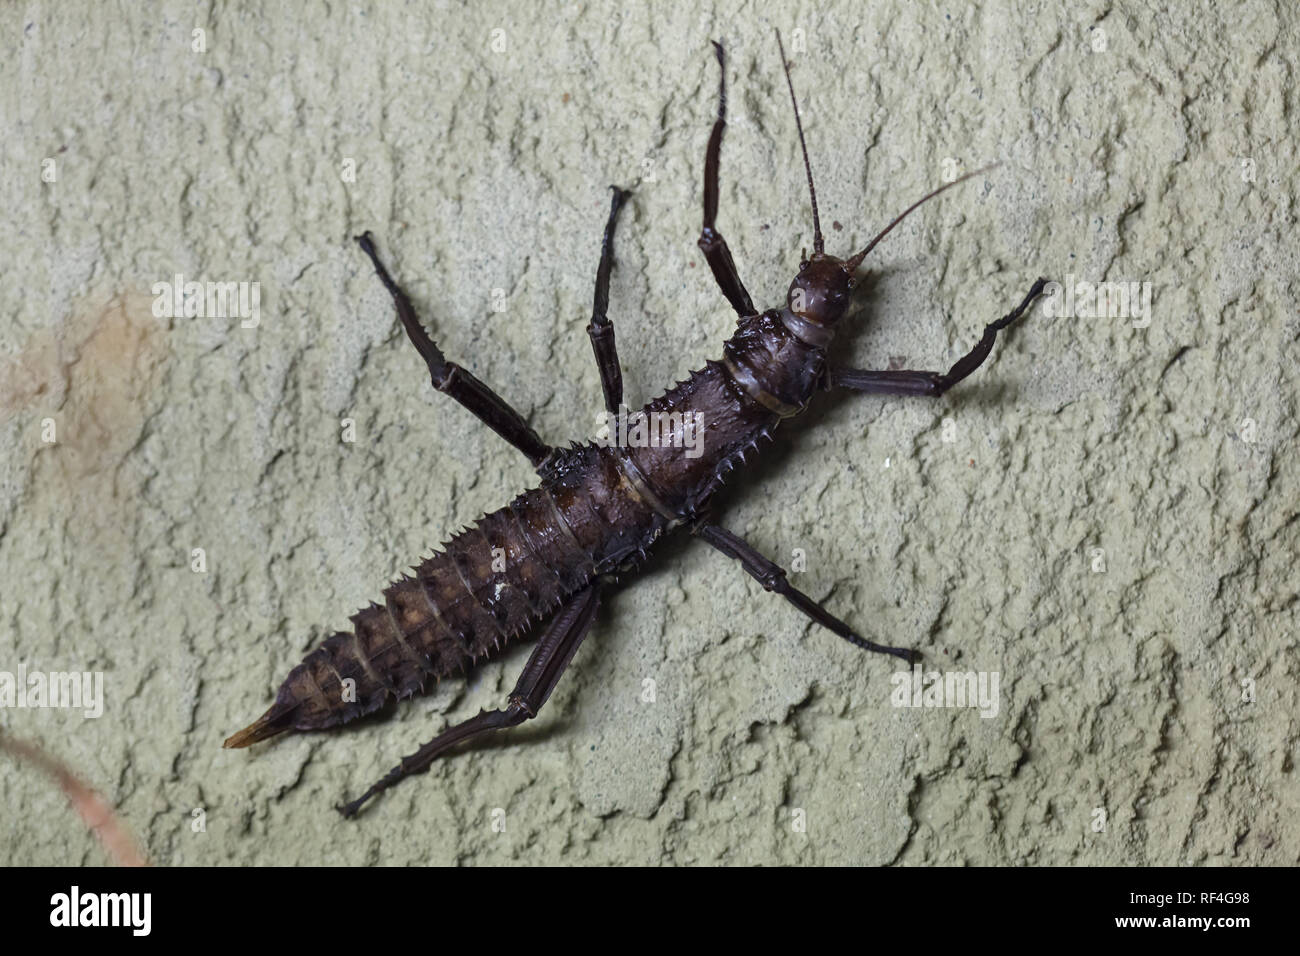 Thorny Devil Stick Insect (Eurycantha calcarata), auch bekannt als die Giant spiny Stick Insect. Stockfoto